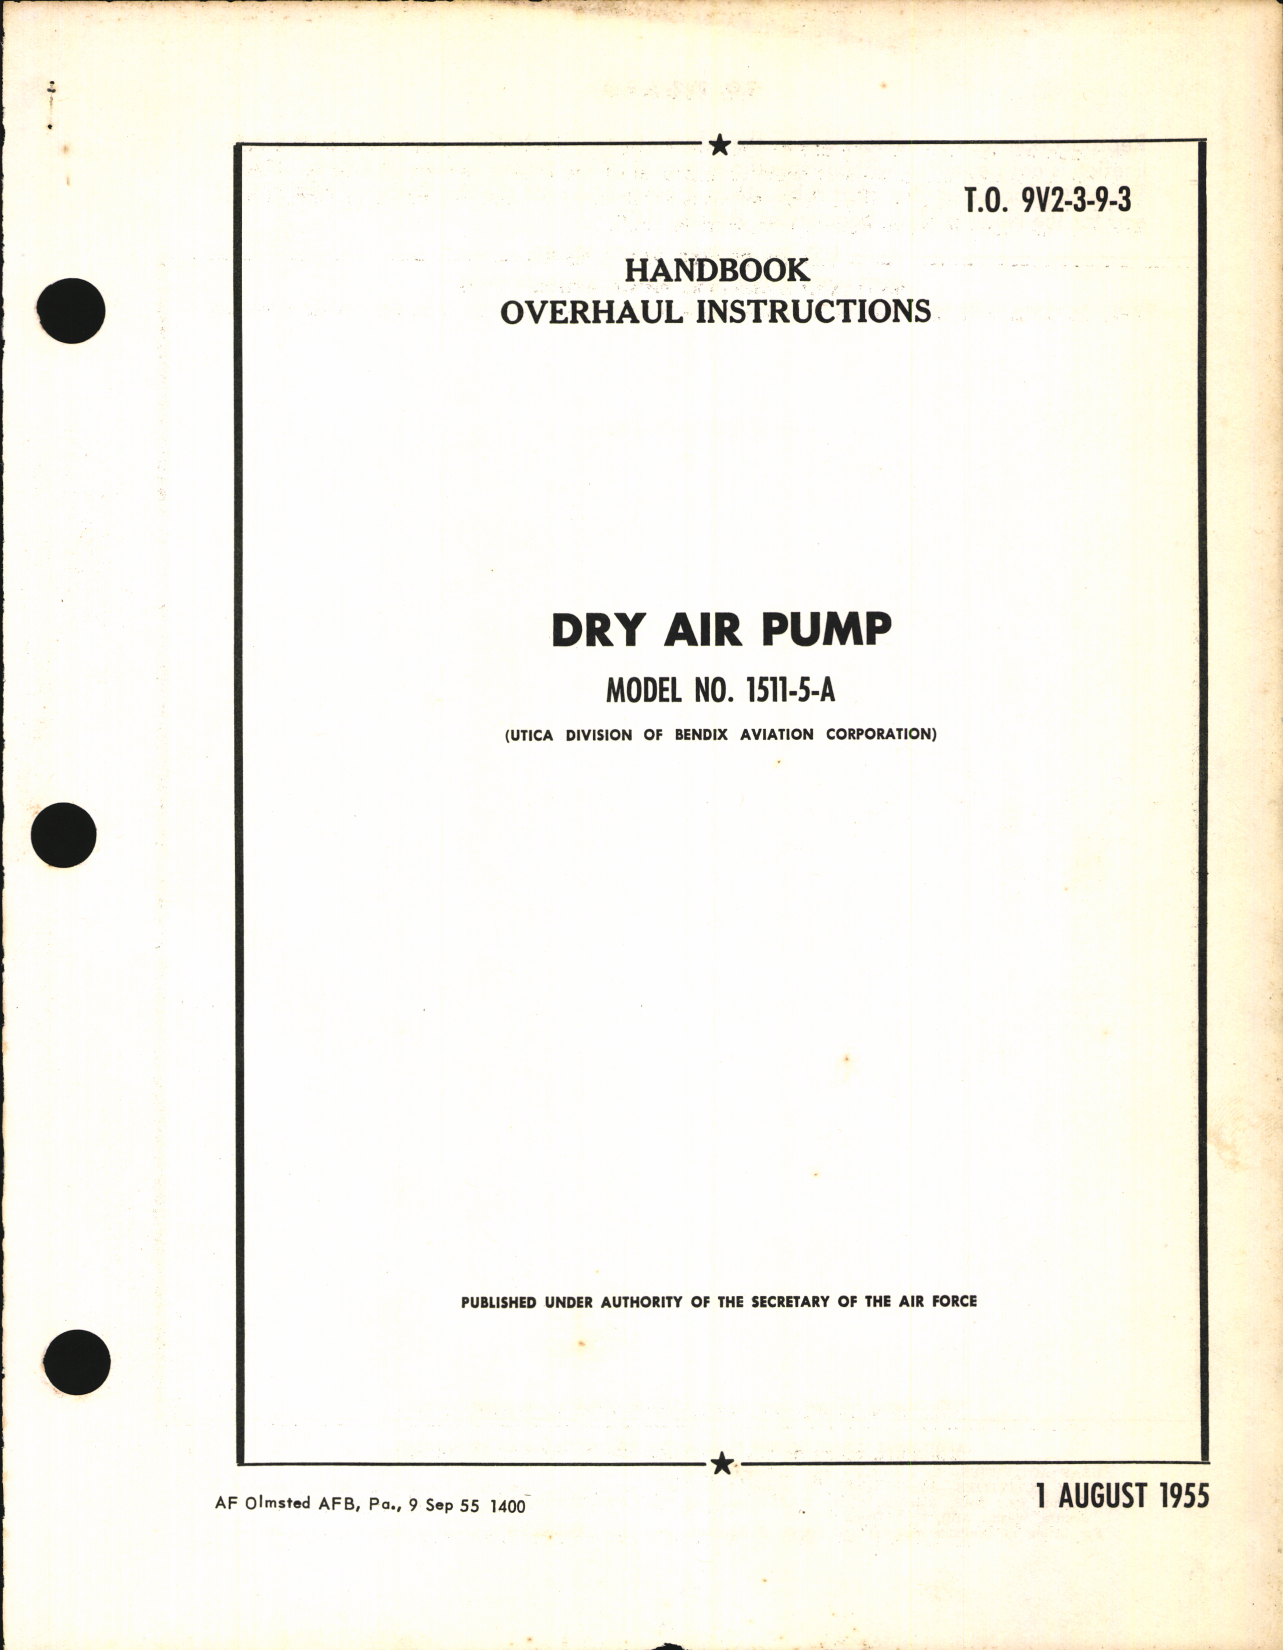 Sample page 1 from AirCorps Library document: Handbook of Overhaul Instructions for Dry Air Pump Model No. 1511-5-A